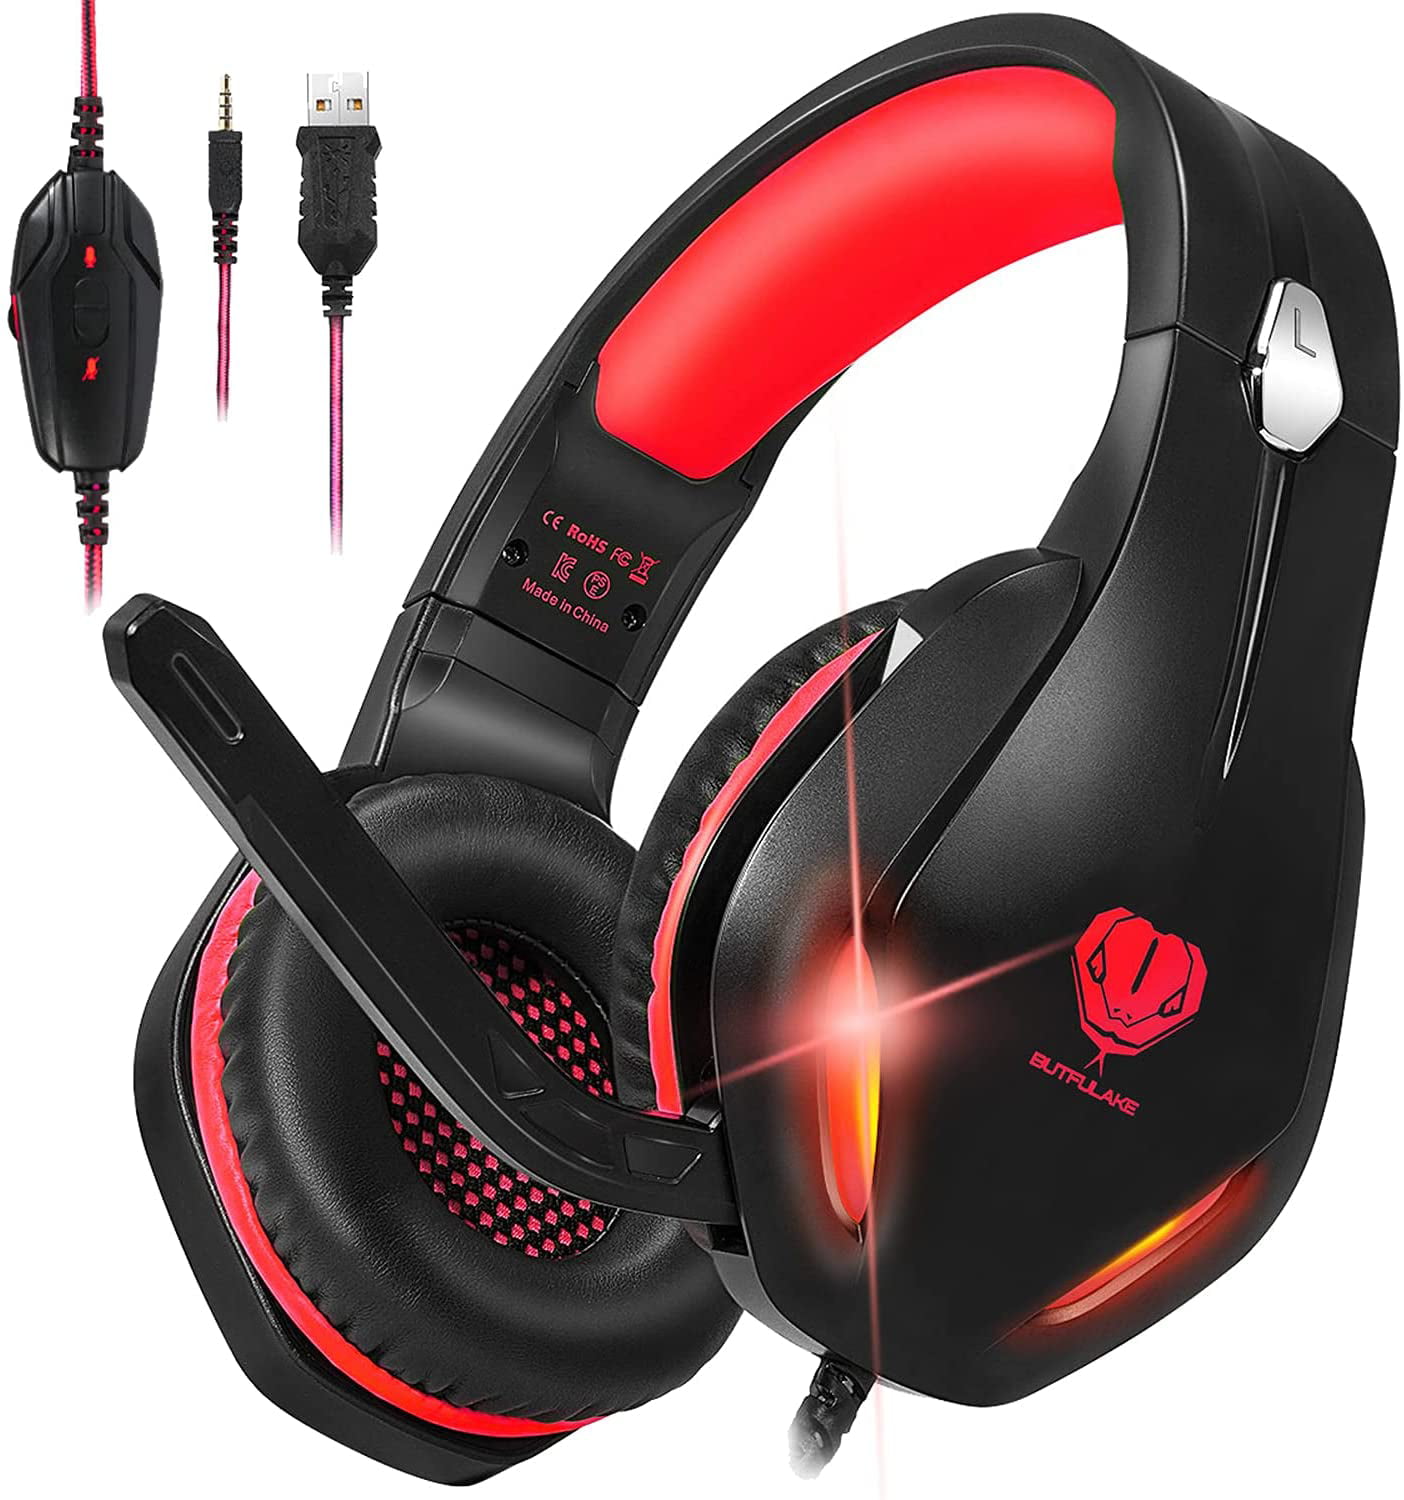 timmerman Zonder Net zo Pacrate Gaming Headset for Xbox, PC, PS4, PS5, Laptop, Crystal Clear Sound  Computer Gamer Headset with Noise Canceling Mic and LED Light - Lightweight  Comfortable Over Ear Headphones - Walmart.com